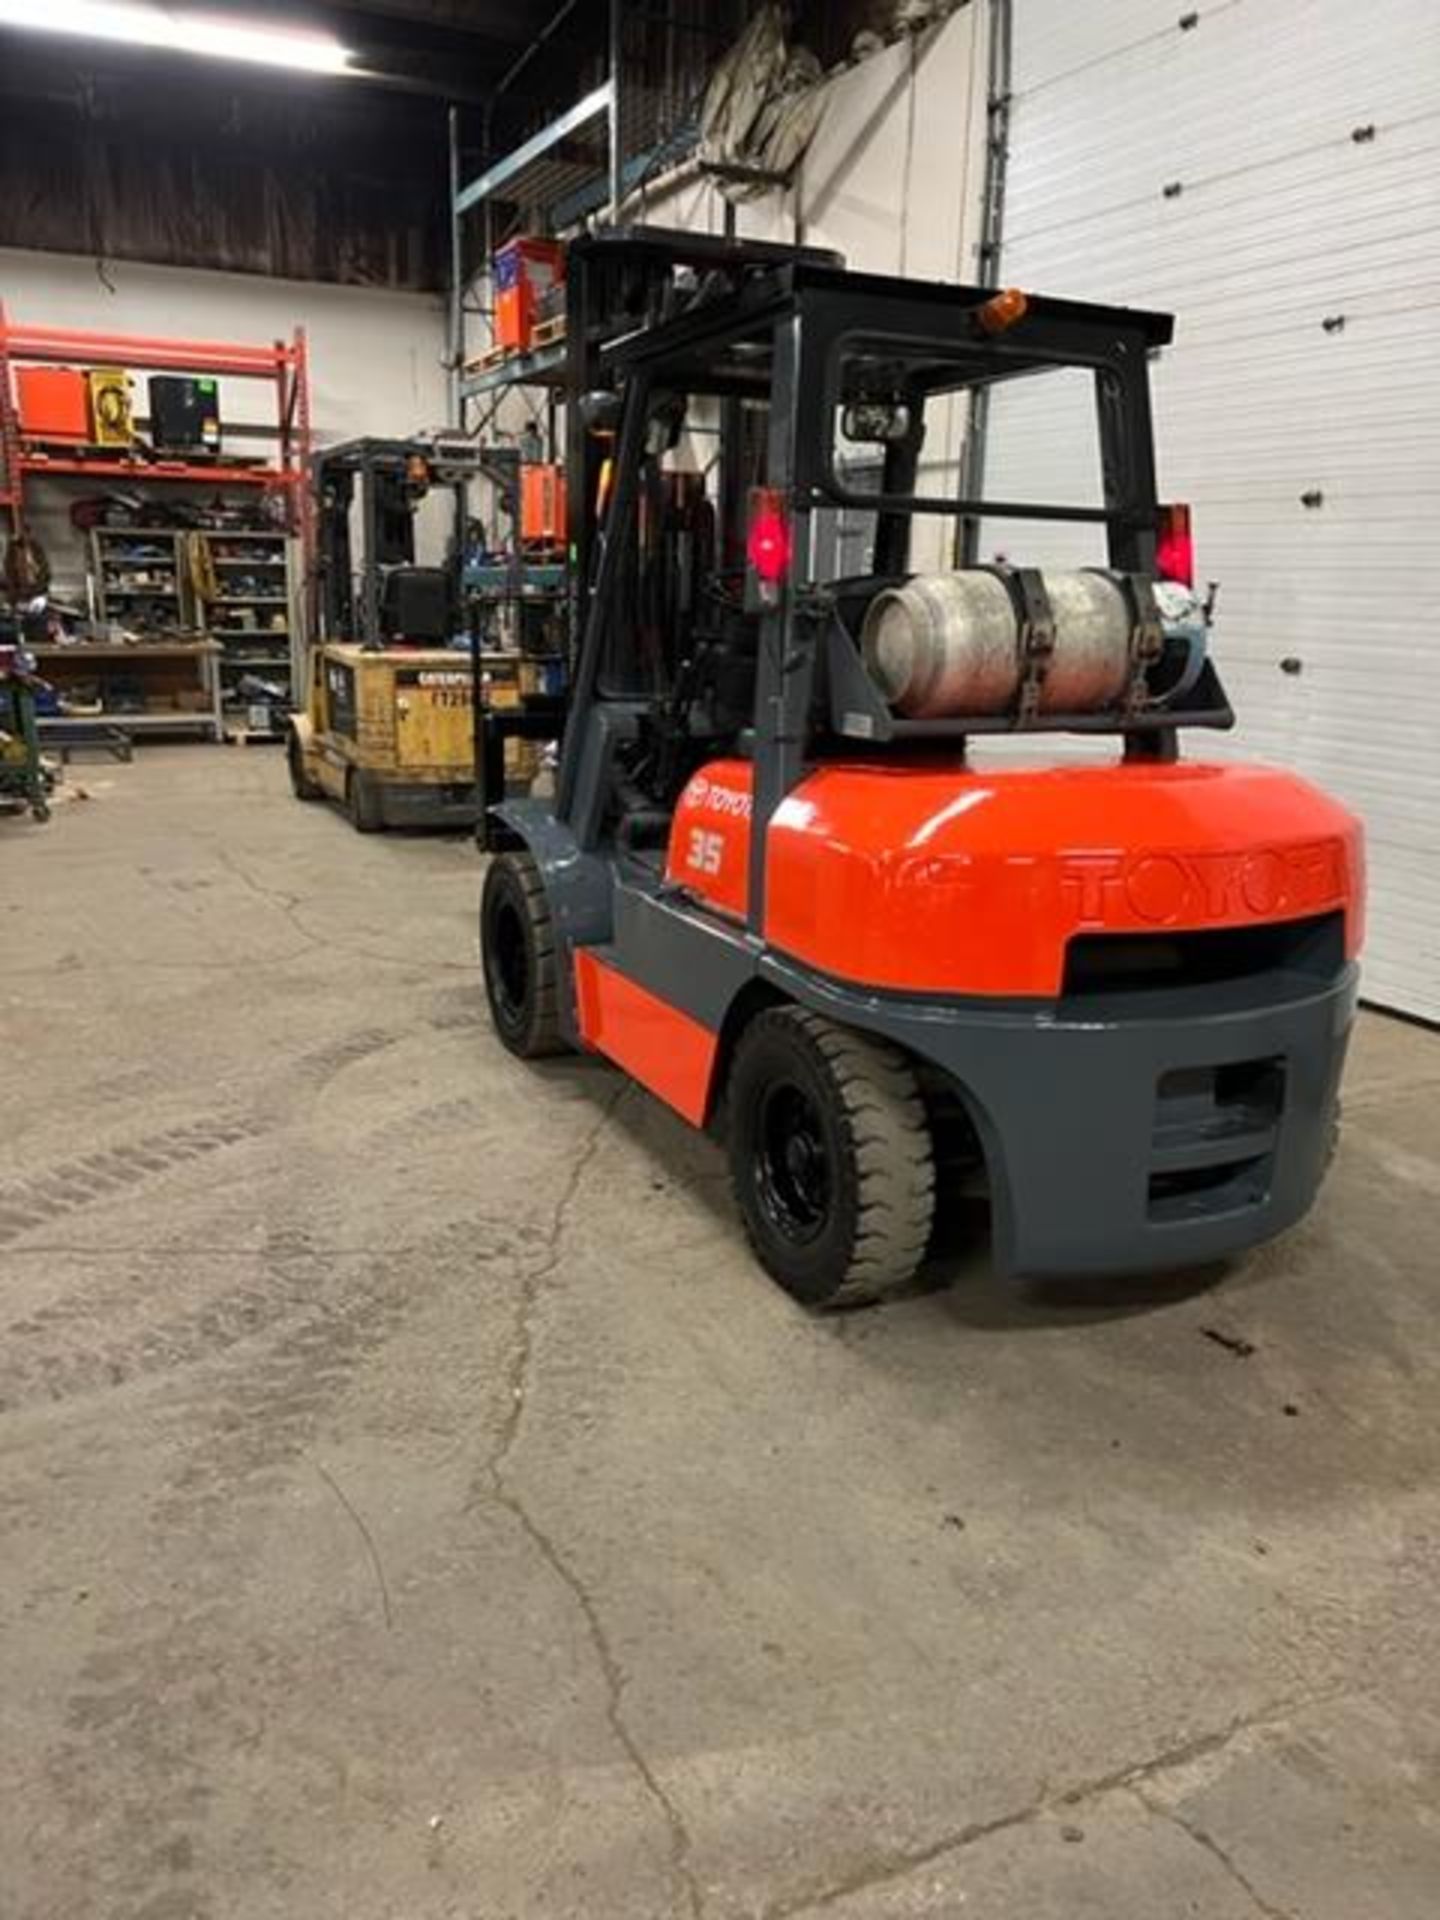 FREE CUSTOMS - MINT Toyota model 35 - 7,000lbs Capacity OUTDOOR Forklift LPG (propane) with - Image 4 of 4